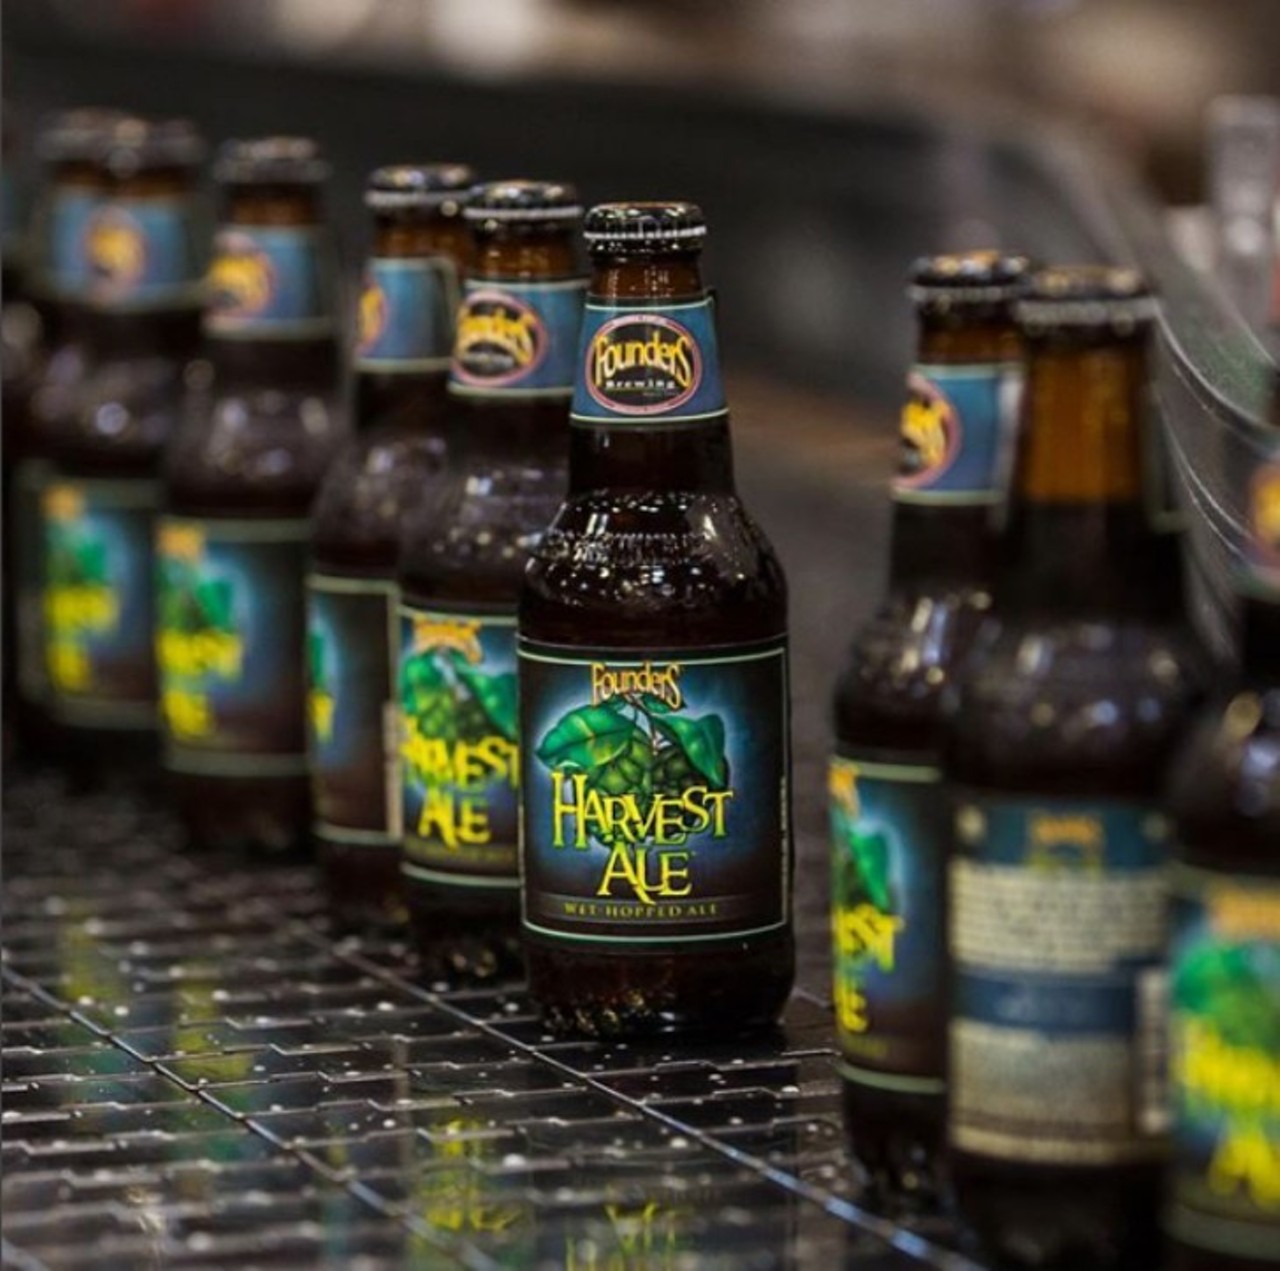 Founder&#146;s Harvest Ale
Grand Rapids - 7.6%
This crisp amber ale bursts with citrus notes of lemon and orange with malted undertones that make this beer a real treat.
Photo courtesy of @c_block